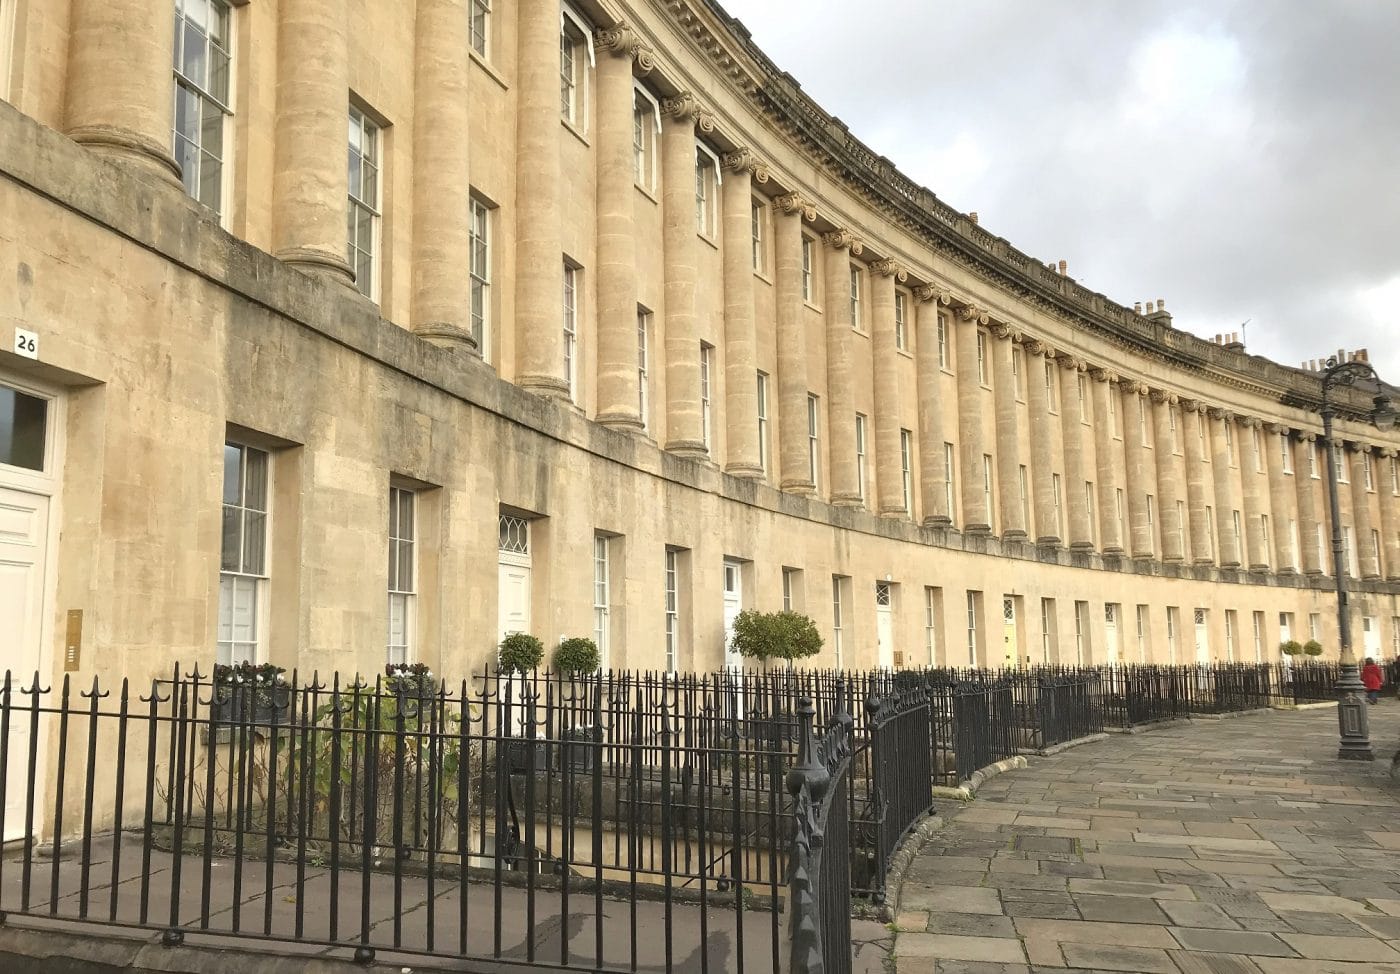 Bath's Royal Crescent is one of the city's architectural highlights